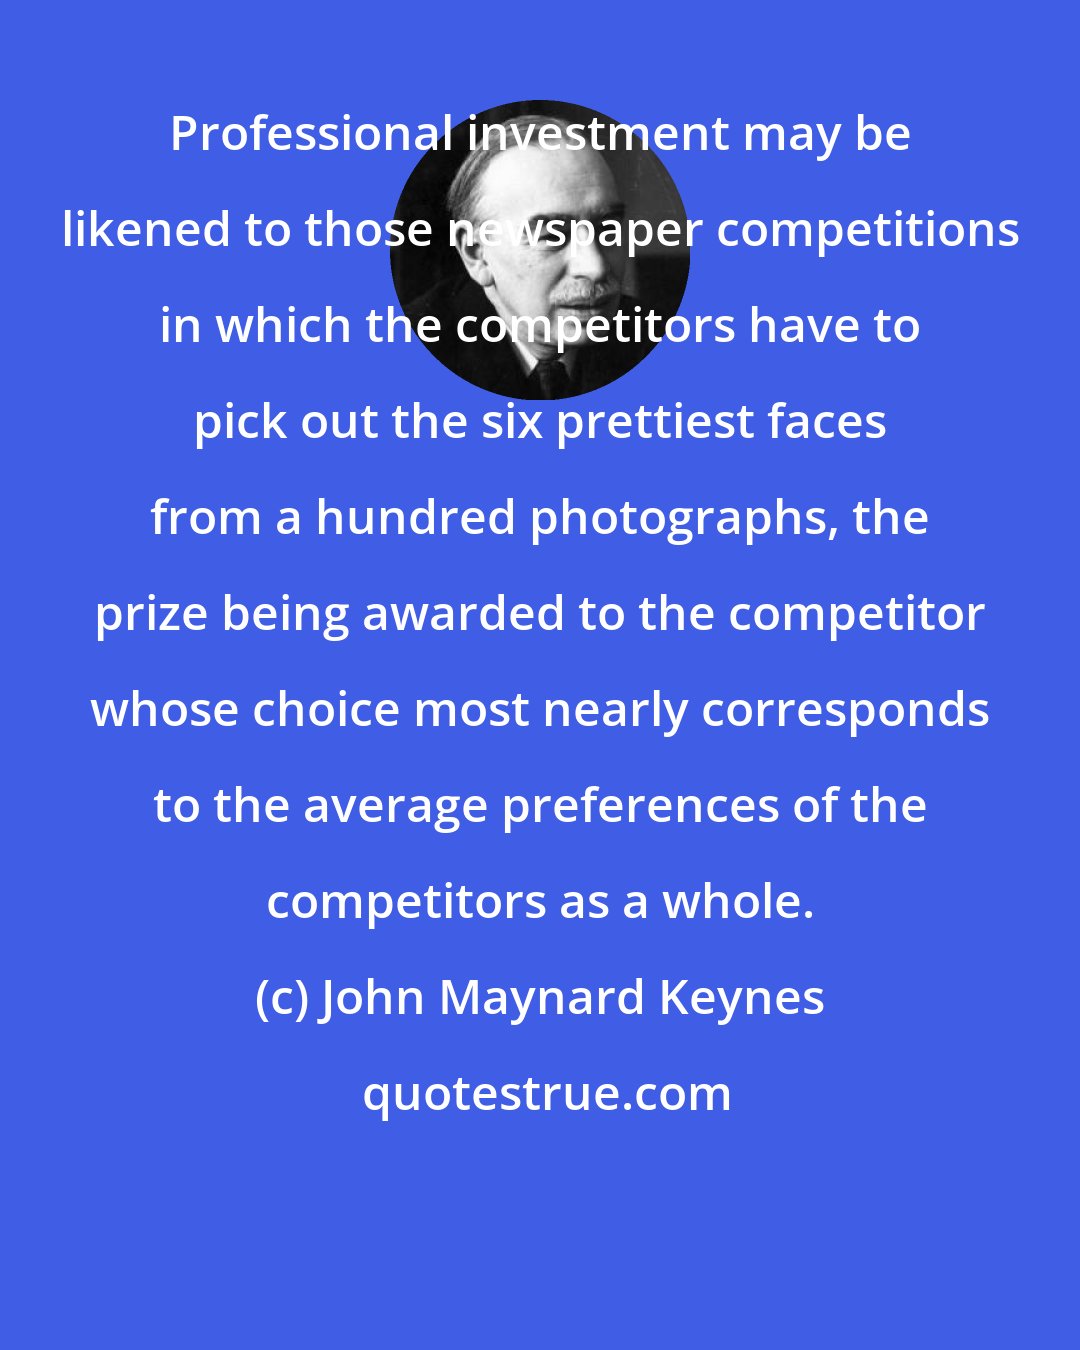 John Maynard Keynes: Professional investment may be likened to those newspaper competitions in which the competitors have to pick out the six prettiest faces from a hundred photographs, the prize being awarded to the competitor whose choice most nearly corresponds to the average preferences of the competitors as a whole.